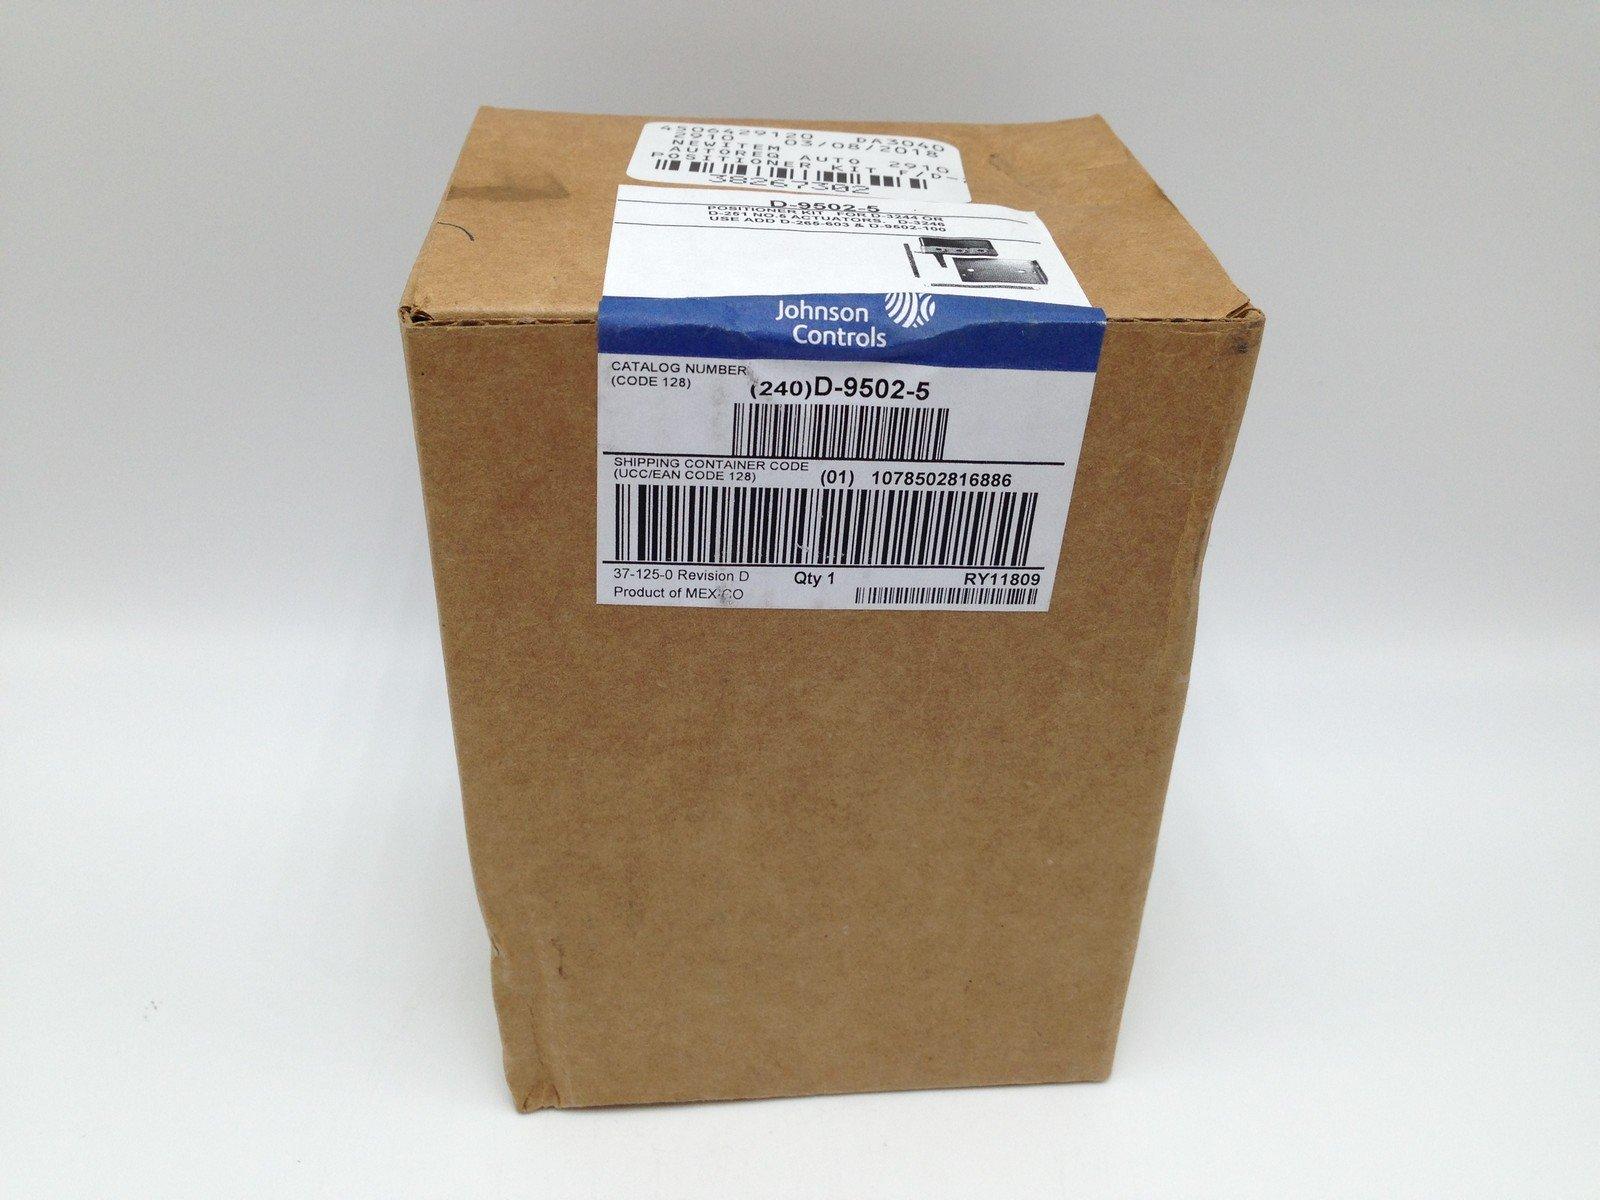 NEW JOHNSON CONTROLS D-9502-5 POSITIONER KIT SEALED IN BOX 